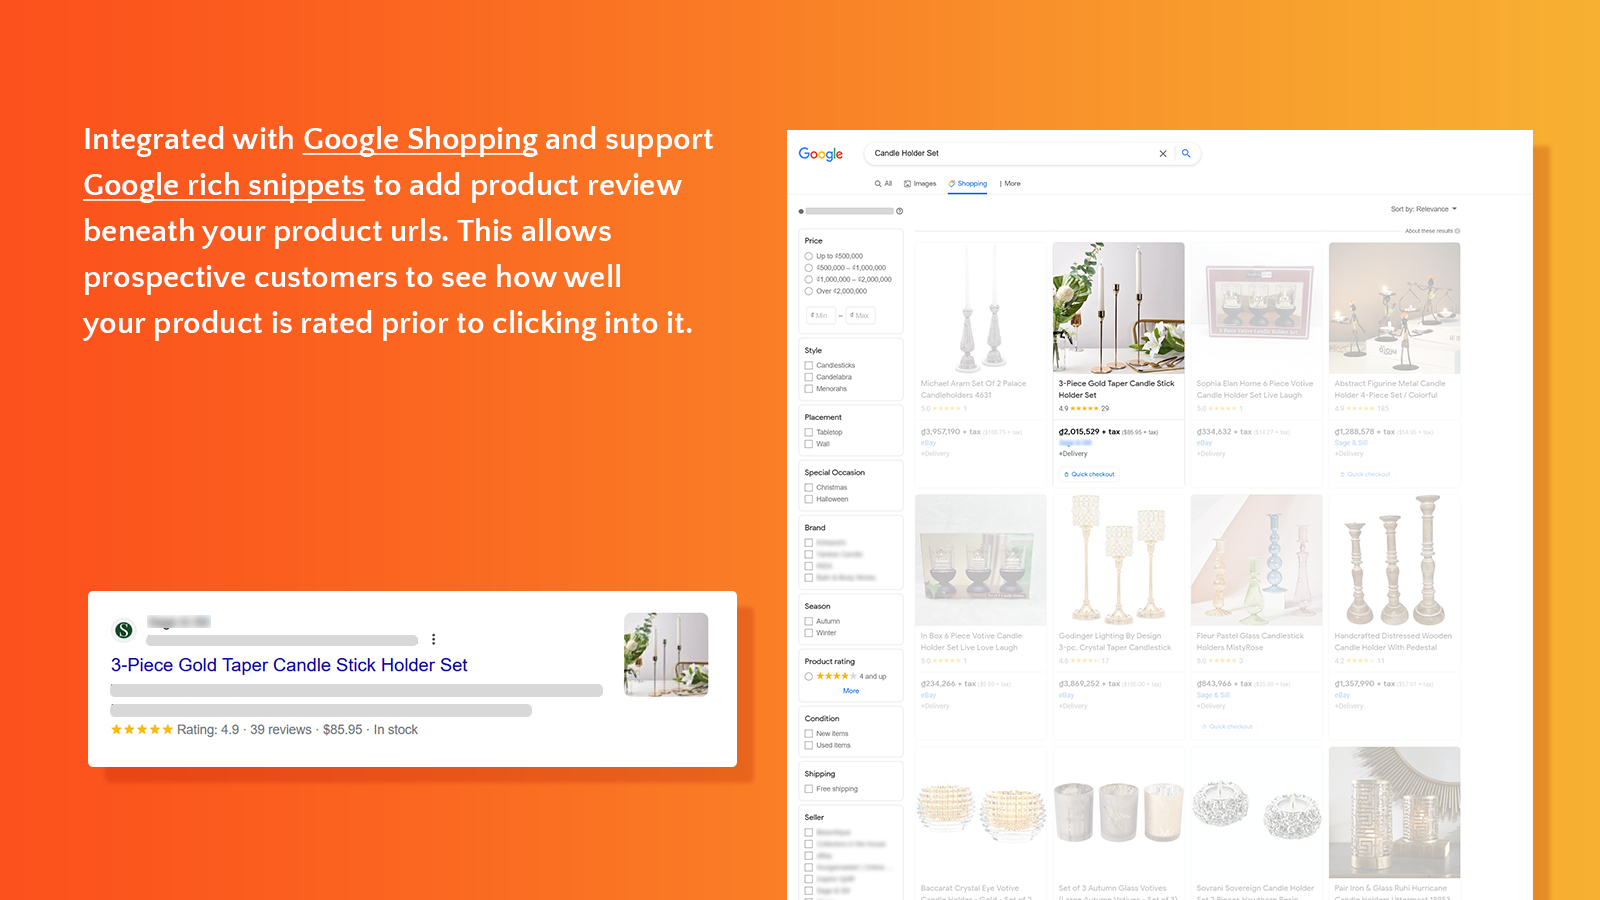 Support Google rich snippets and integrated with Google Shopping